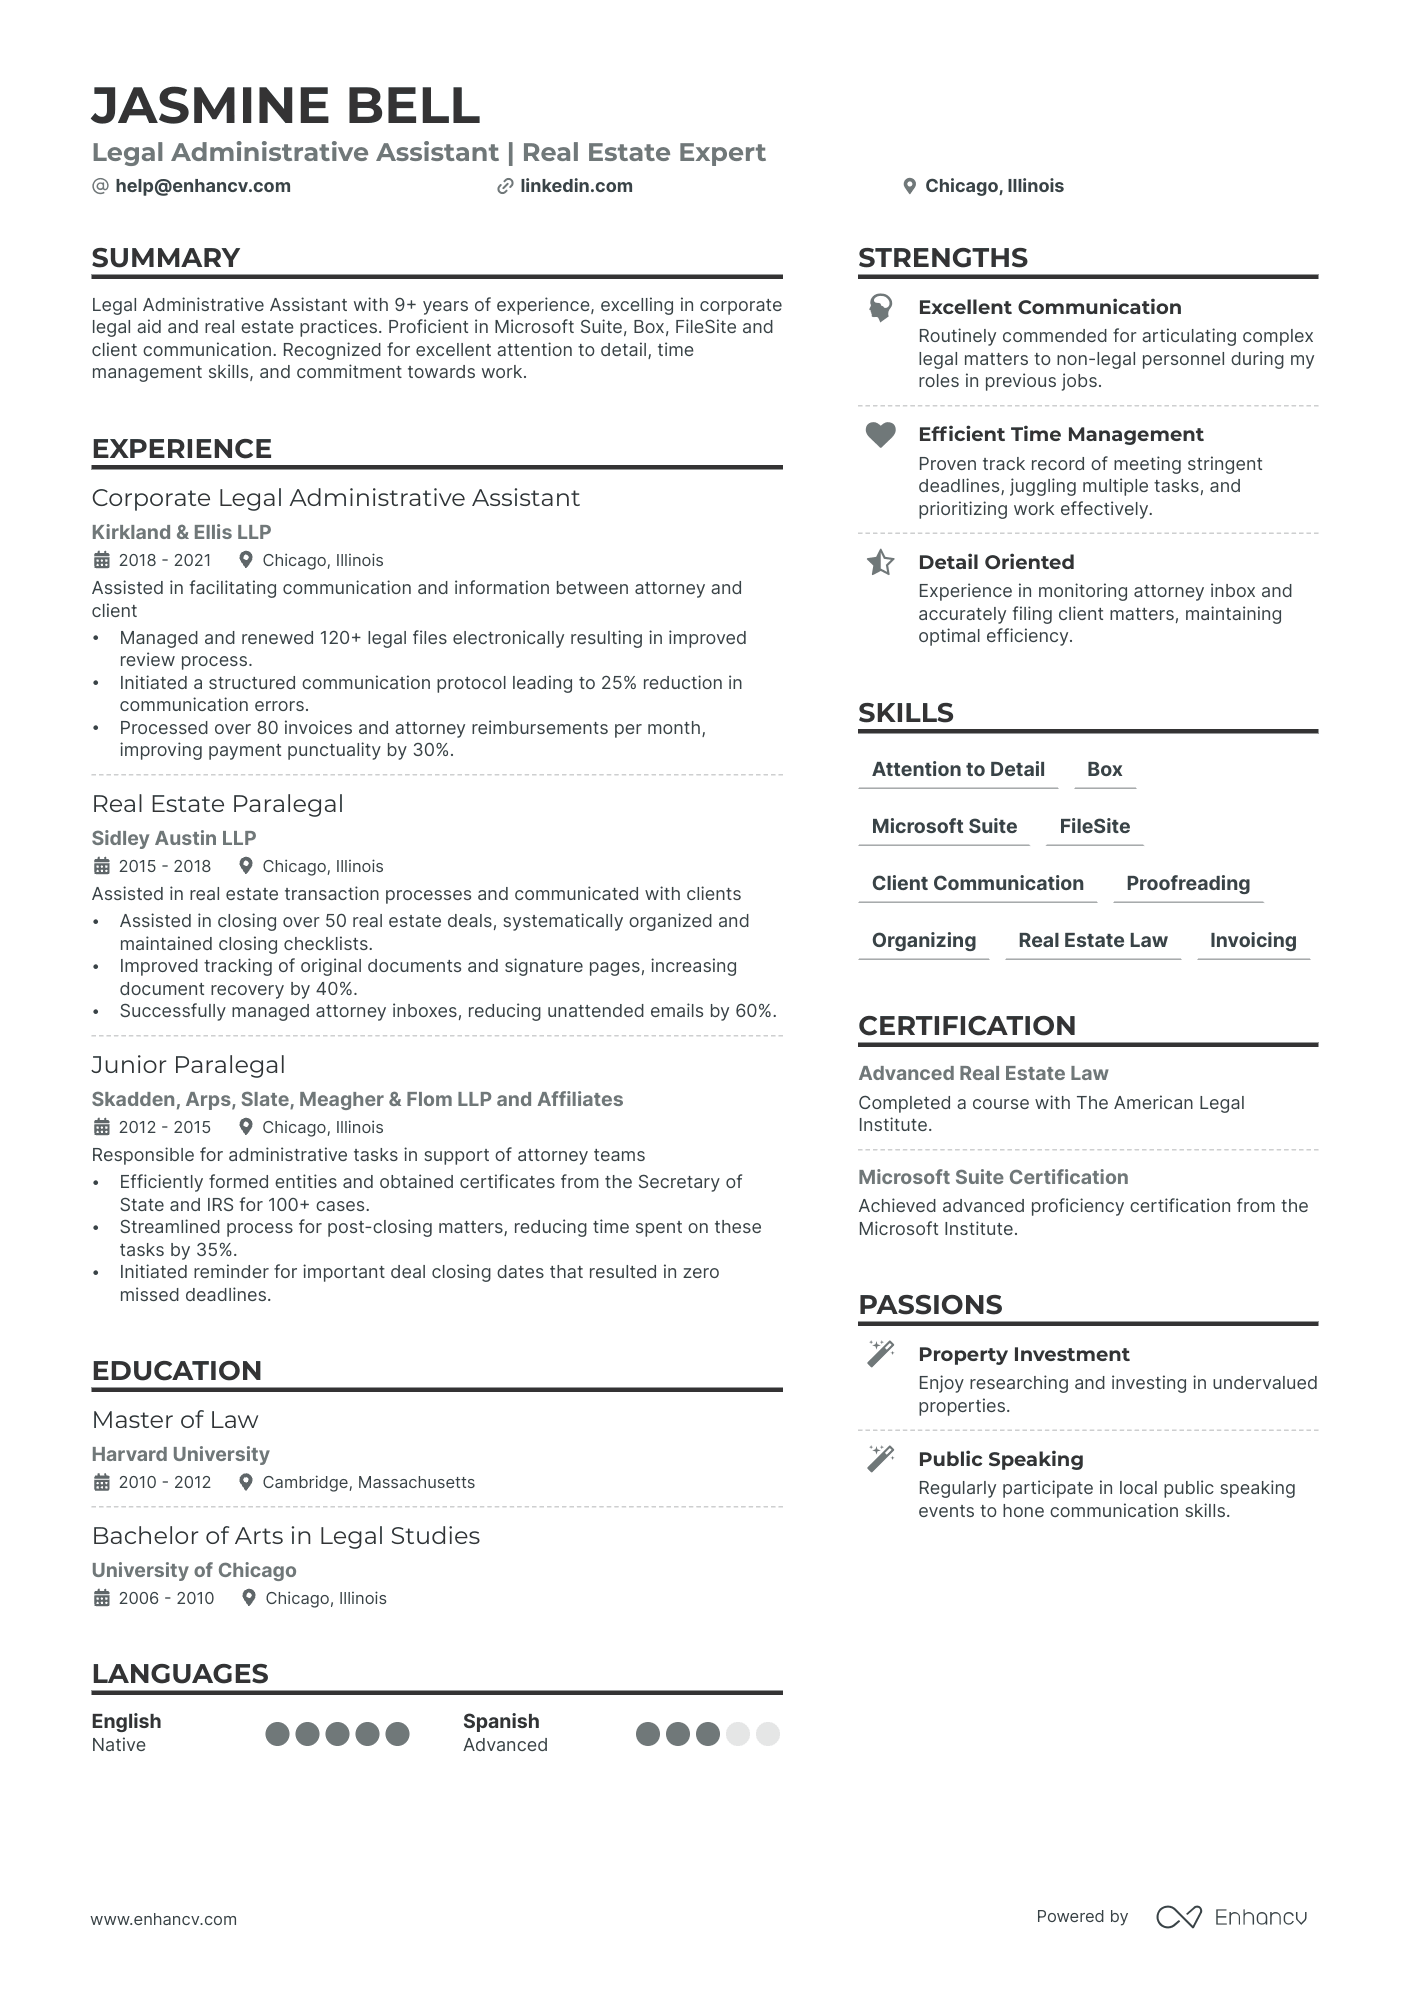 Real Estate Legal Assistant resume example